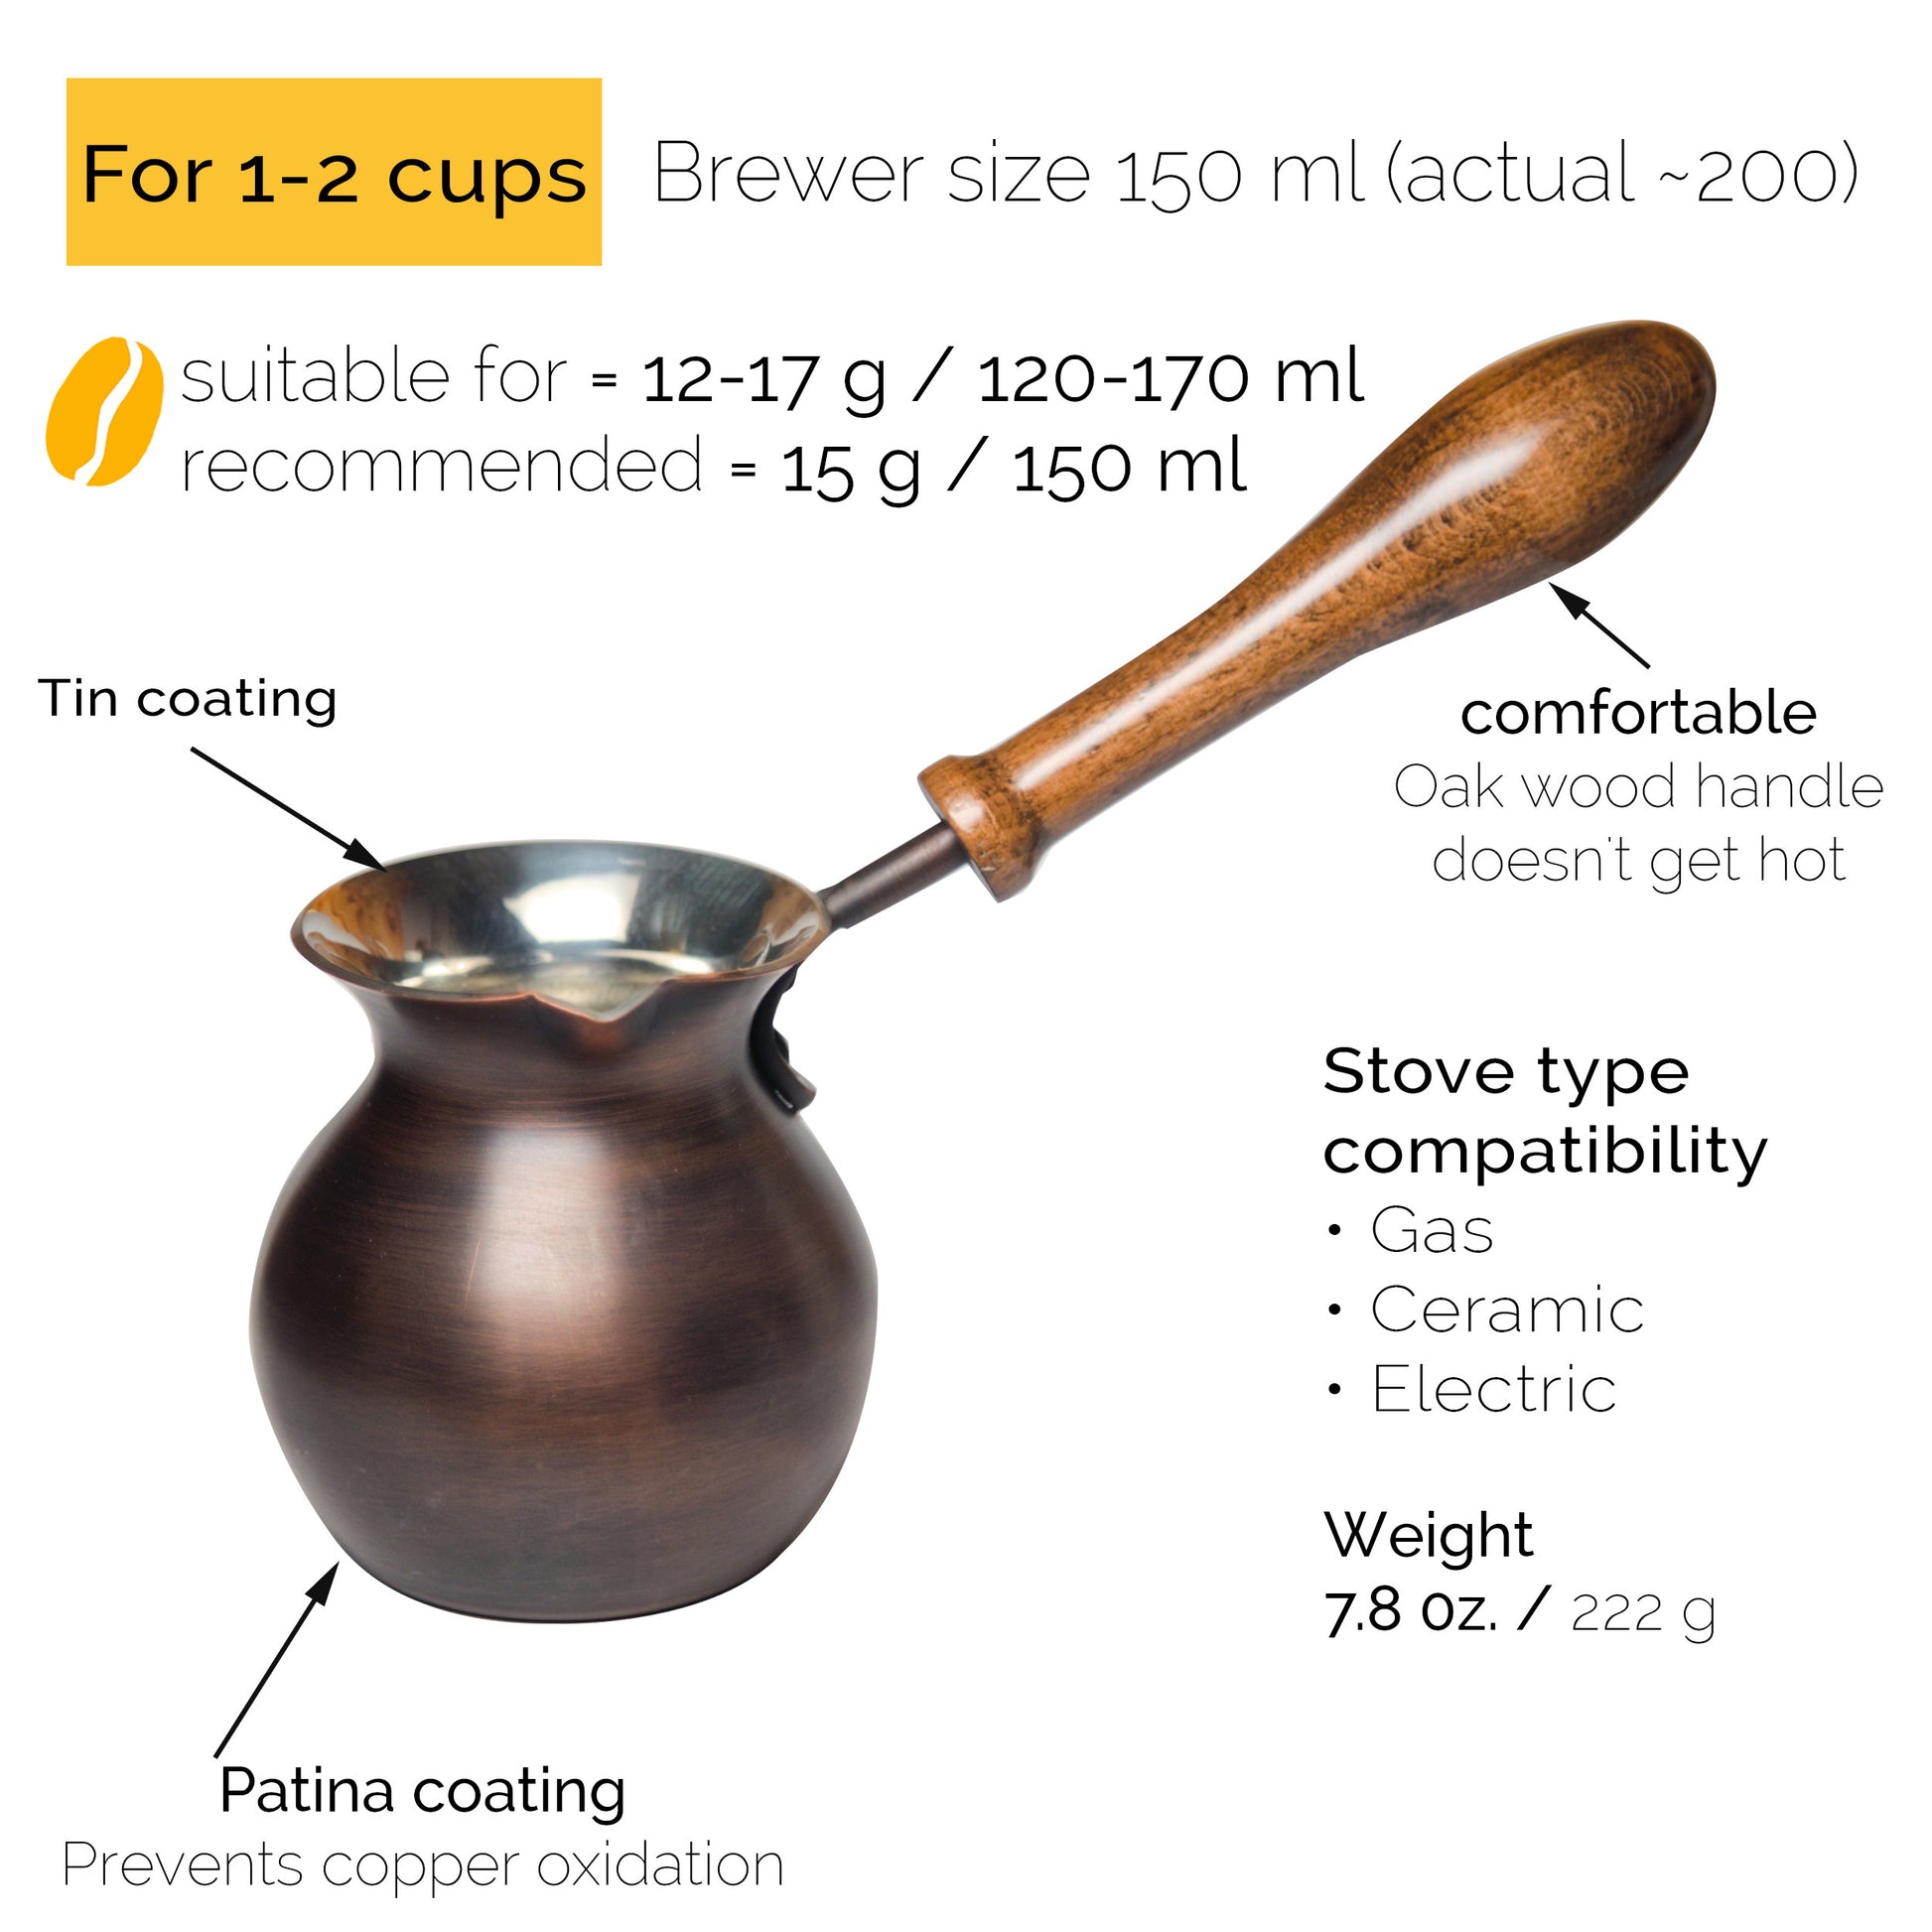 Ball shaped turkish coffee pot patina high quality for 1-2 persons specifications